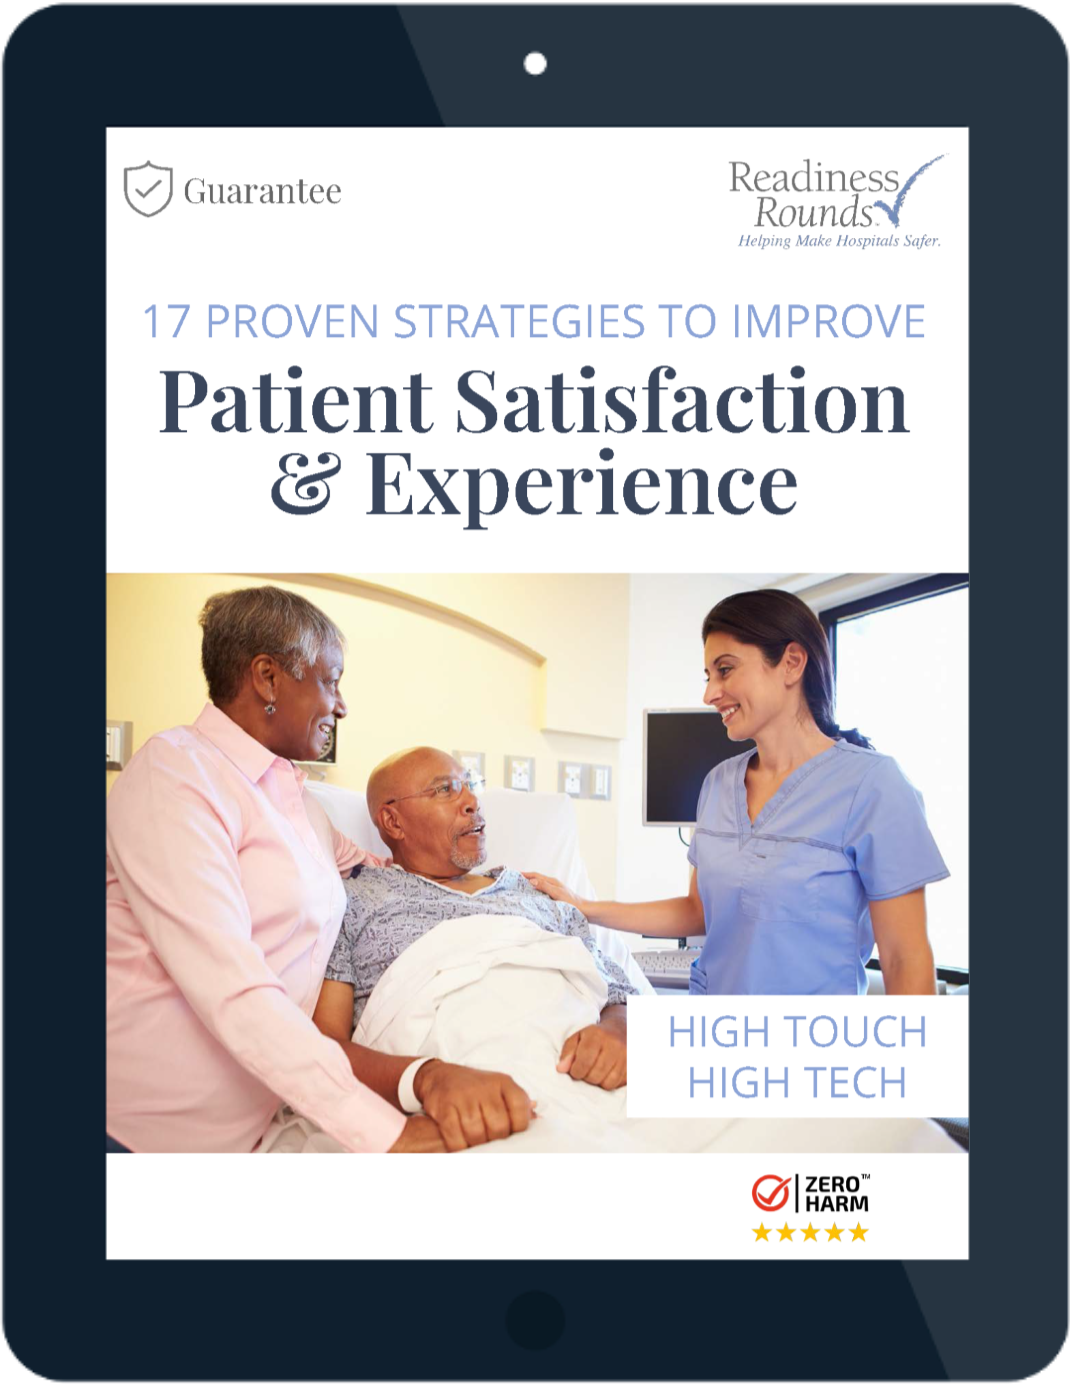 COVER-iPad_17 Proven Strategies to Improve Patient Satisfaction and Experience eBook_v2